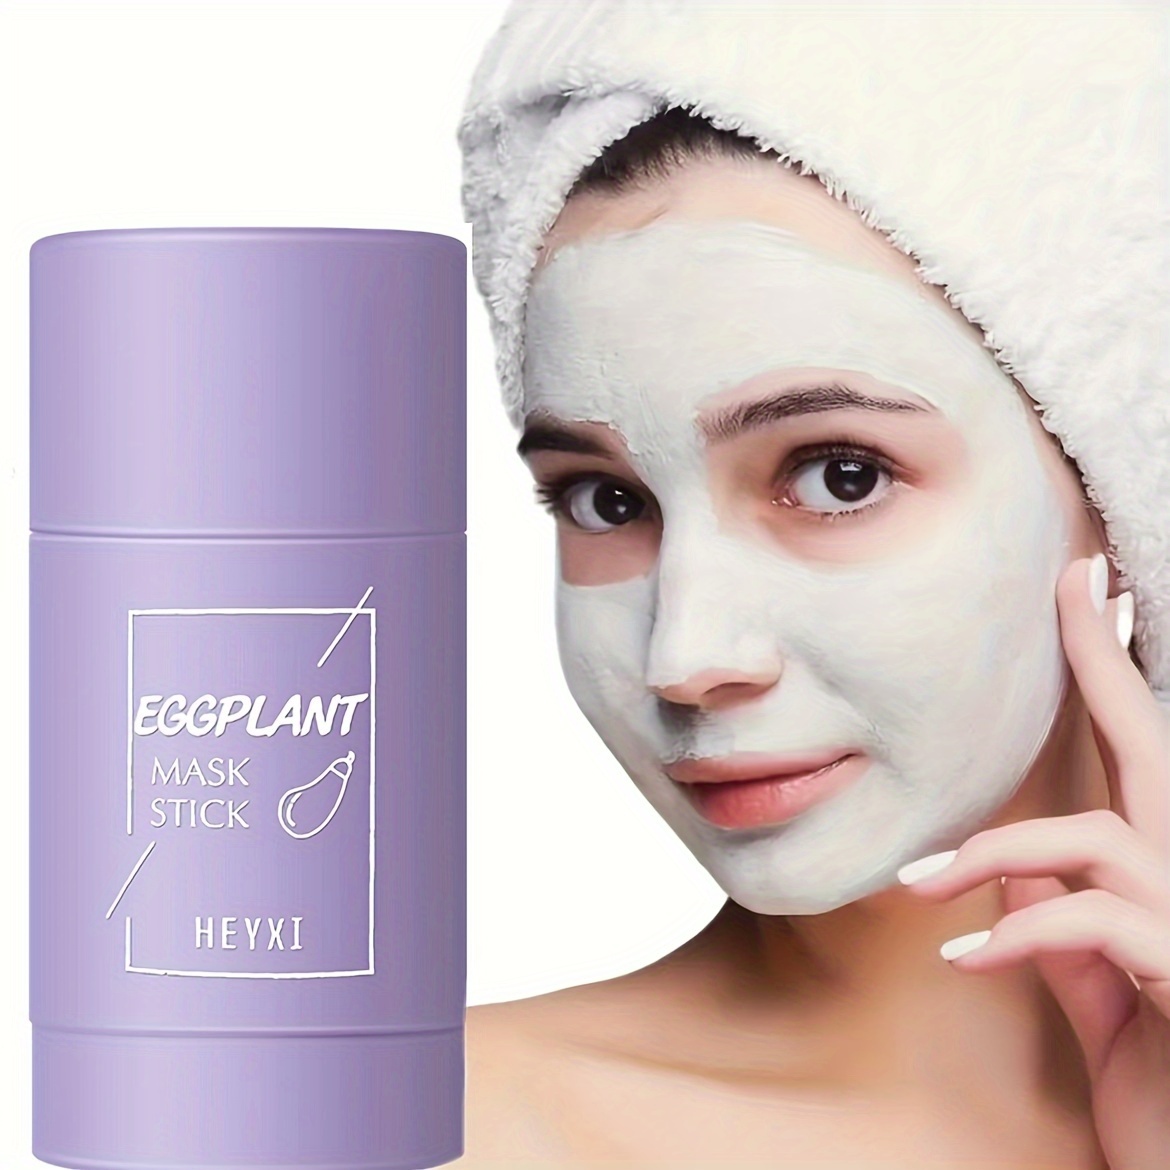 

Heyxi Eggplant Purifying Mask Stick - Deep Pore Cleansing & Oil Control, Moisturizing For All Skin Types, Alcohol-free With Mint Scent